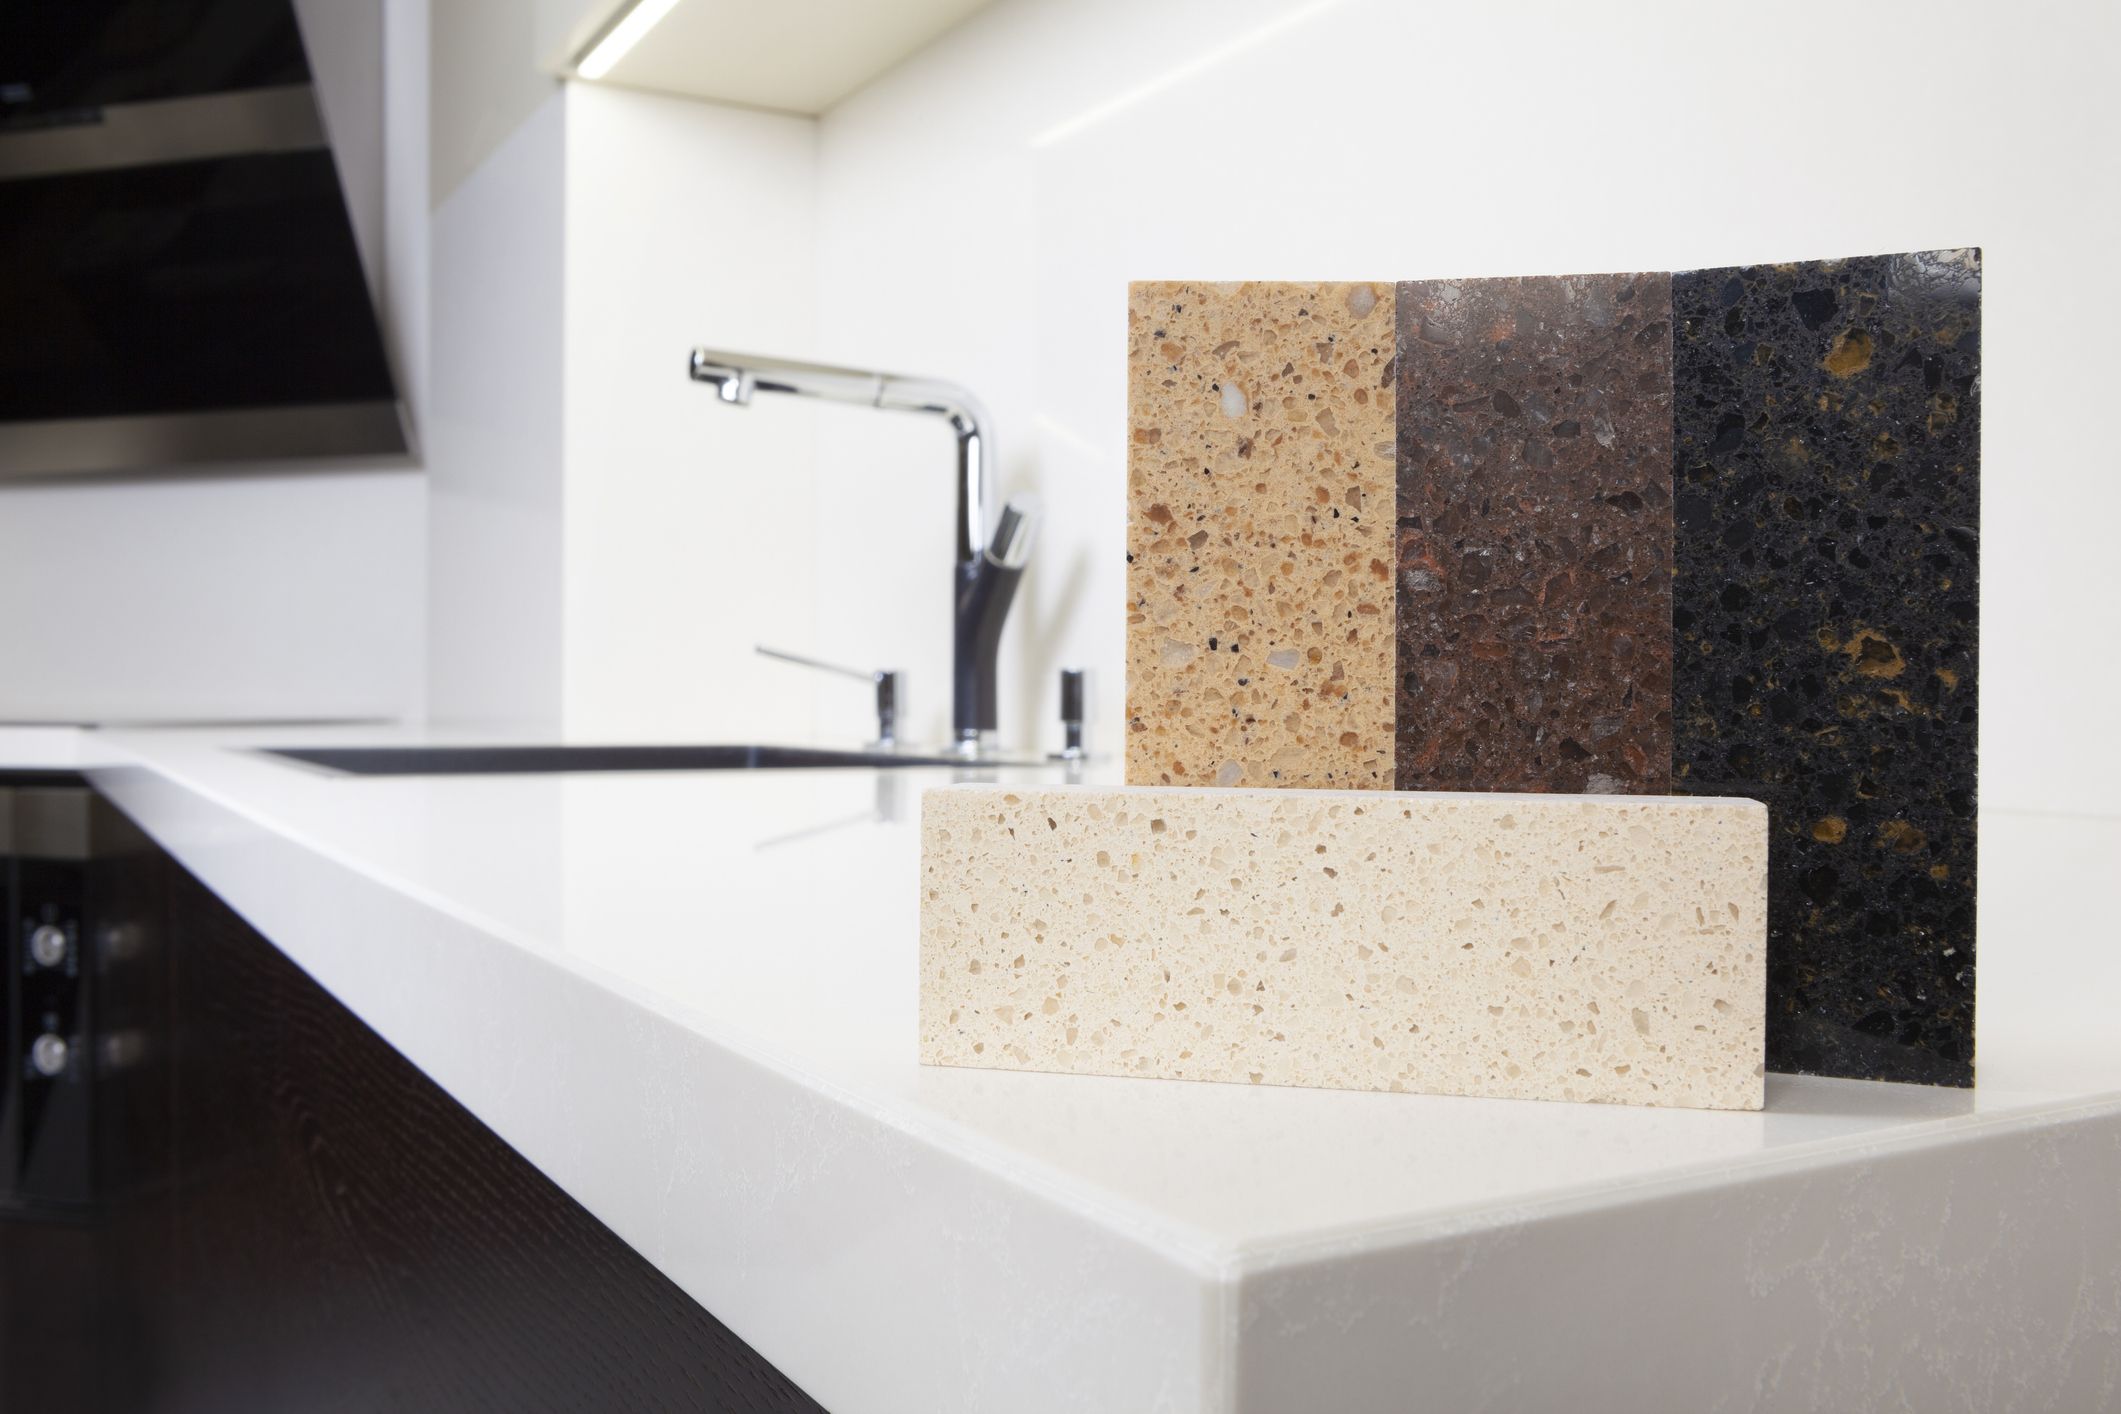 The Best Countertop Options For Kitchens, Which Is Better Granite Or Solid Surface Countertops